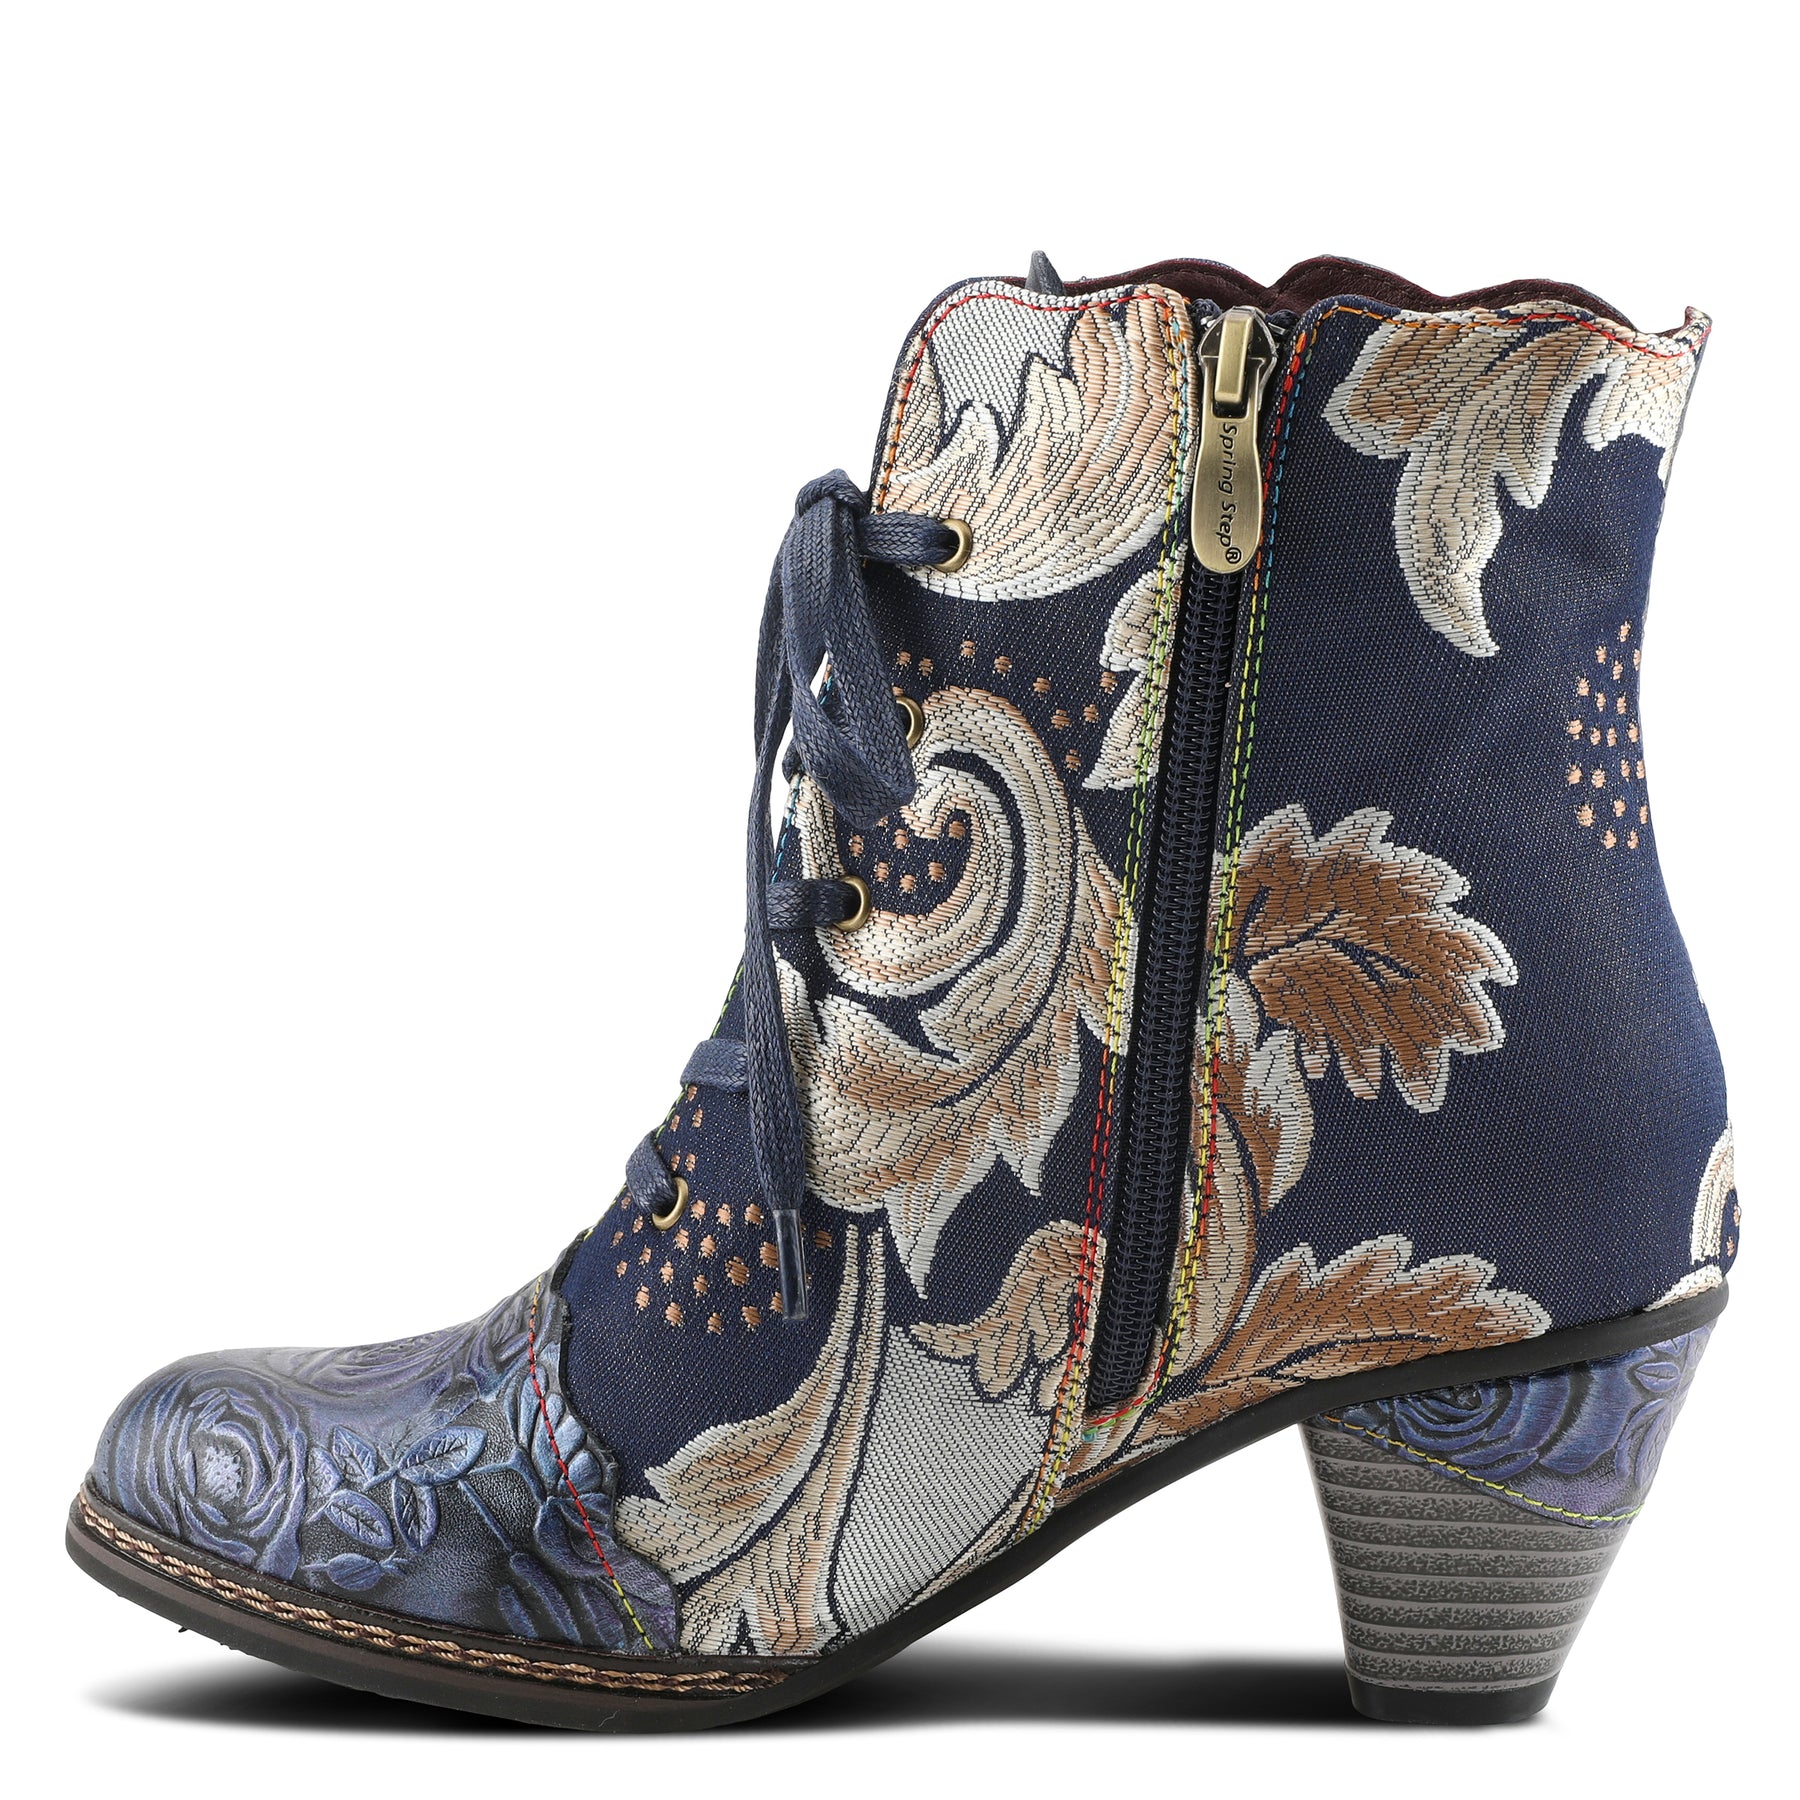 SIREN BOOTIE by L'ARTISTE – Spring Step Shoes